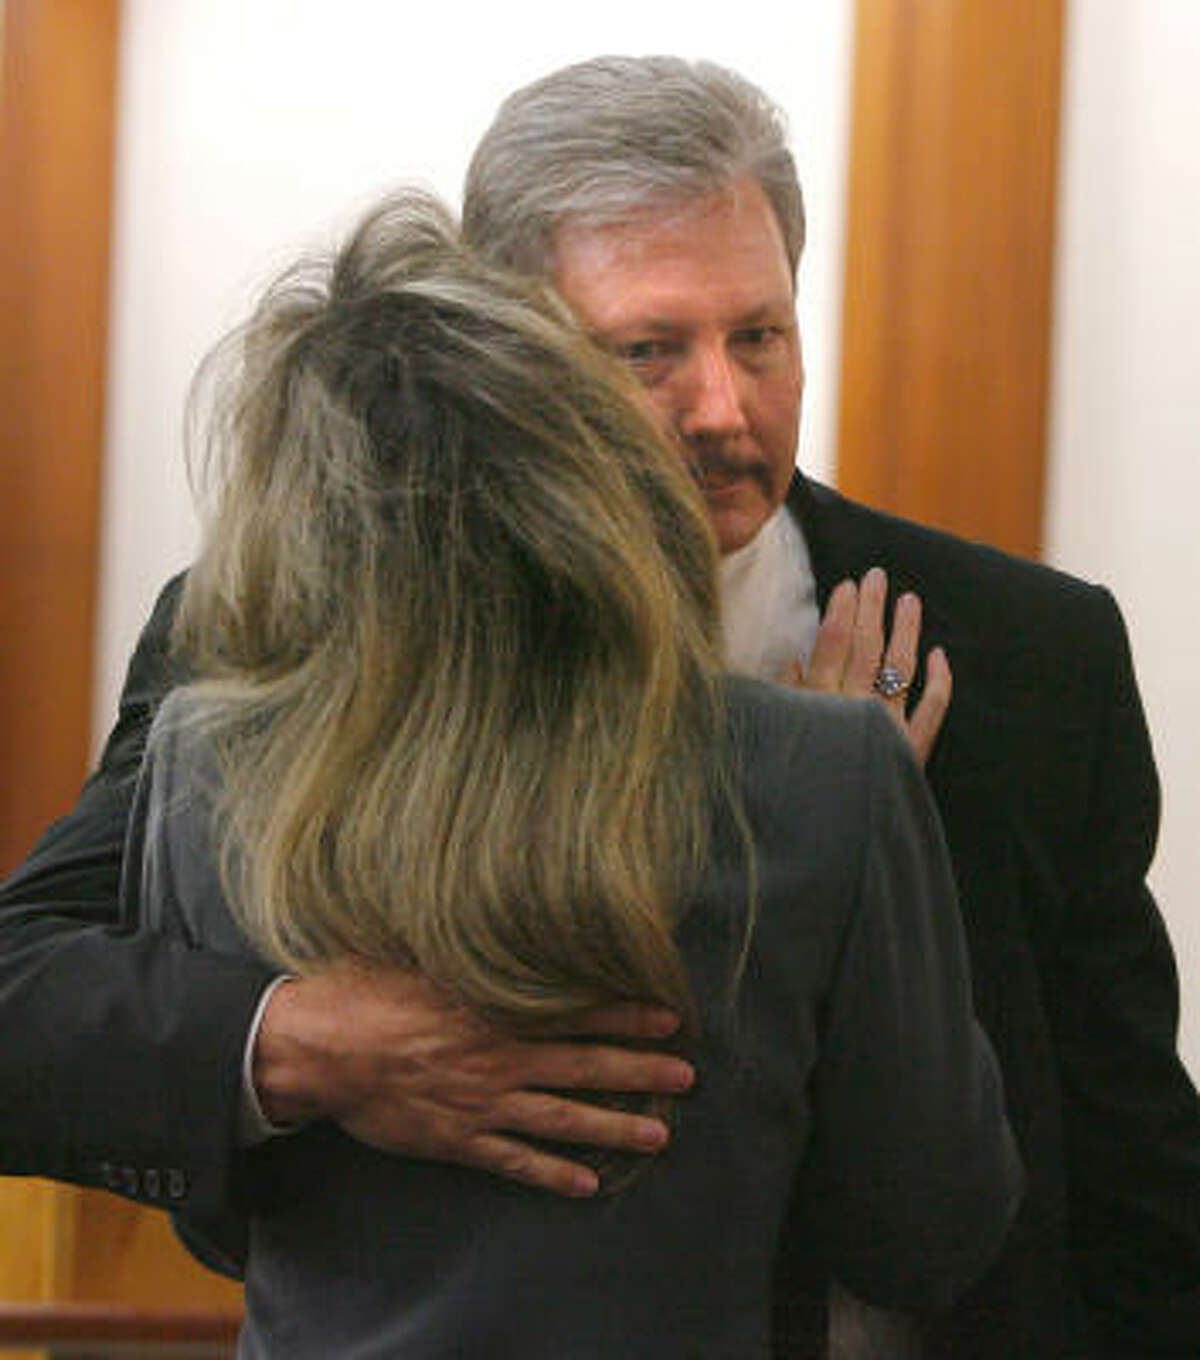 Former Precinct 4 constable's Capt. Tim Cannon hugs his wife, Terri Cannon, during a break Wednesday in his trial on accusations that he tampered with evidence. Jurors today found Cannon not guilty.